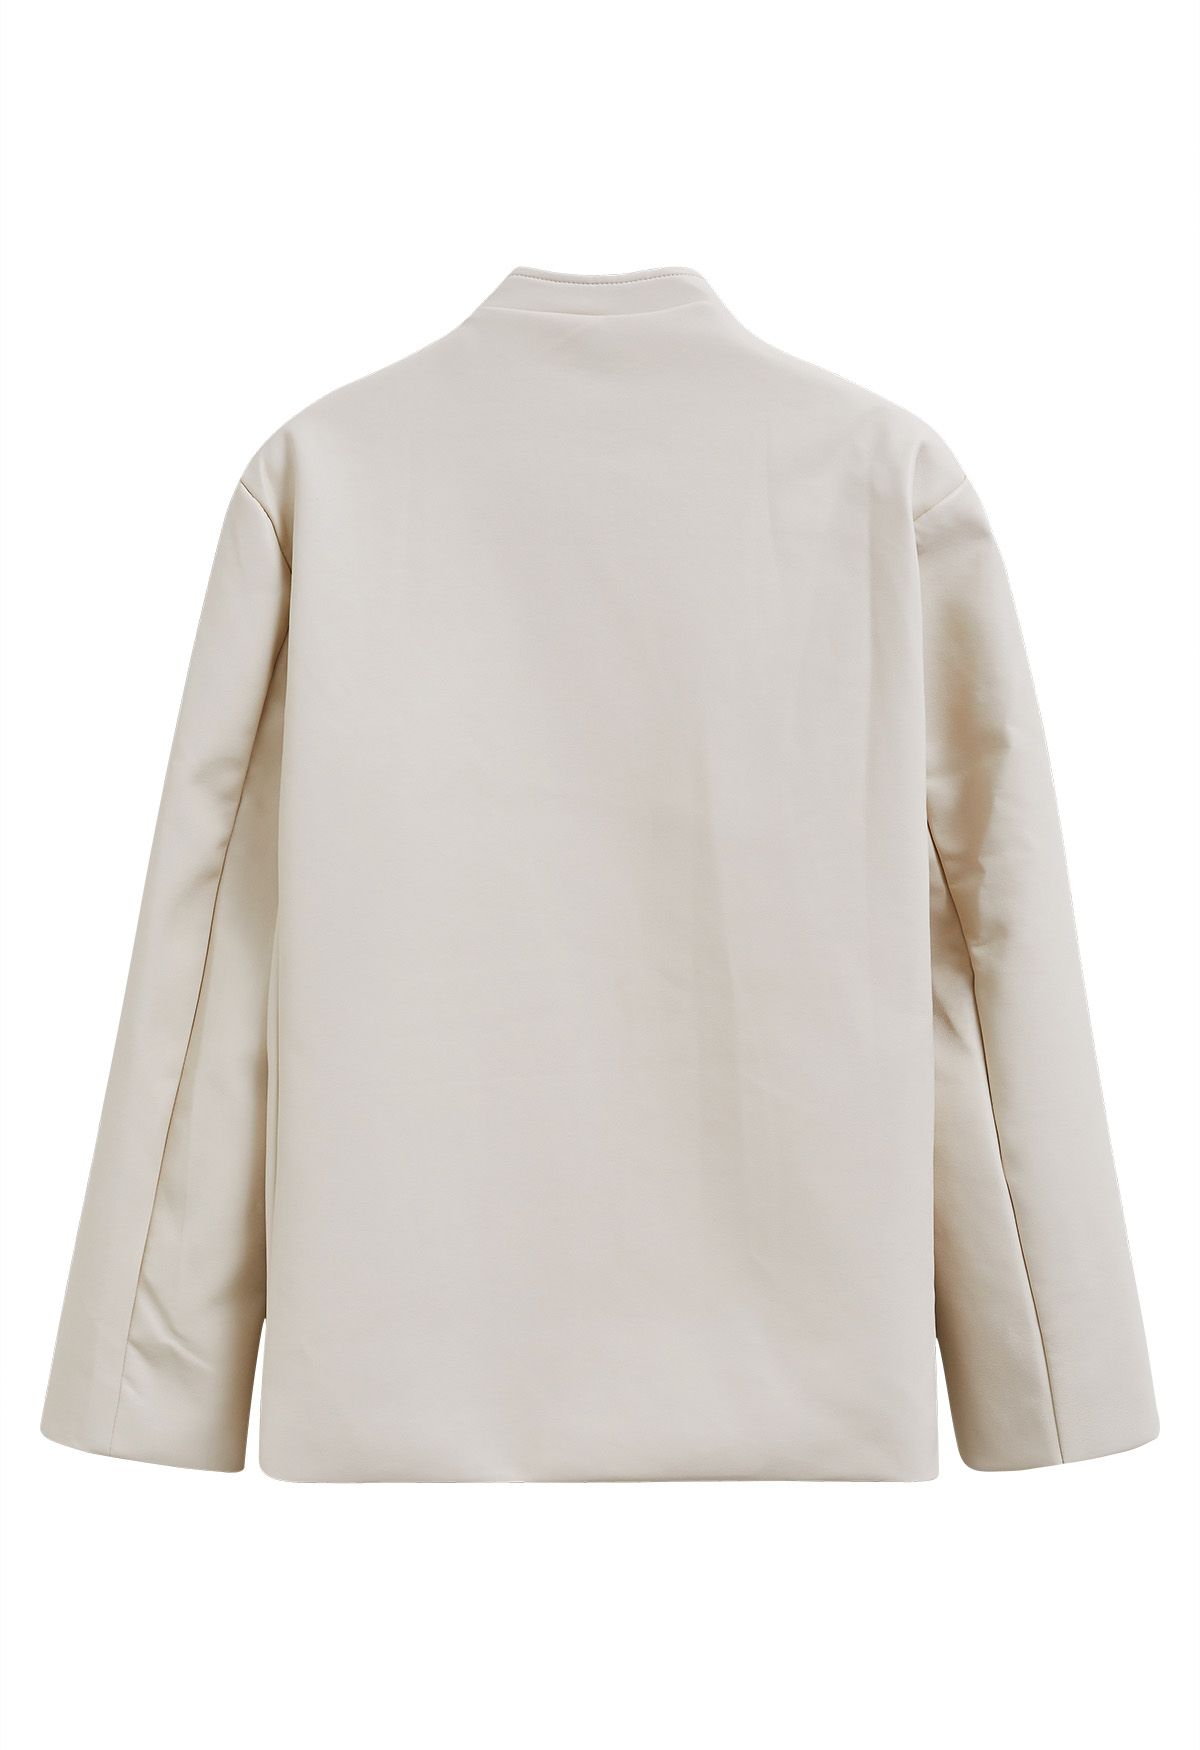 Simplicity Collarless Faux Leather Jacket in Ivory